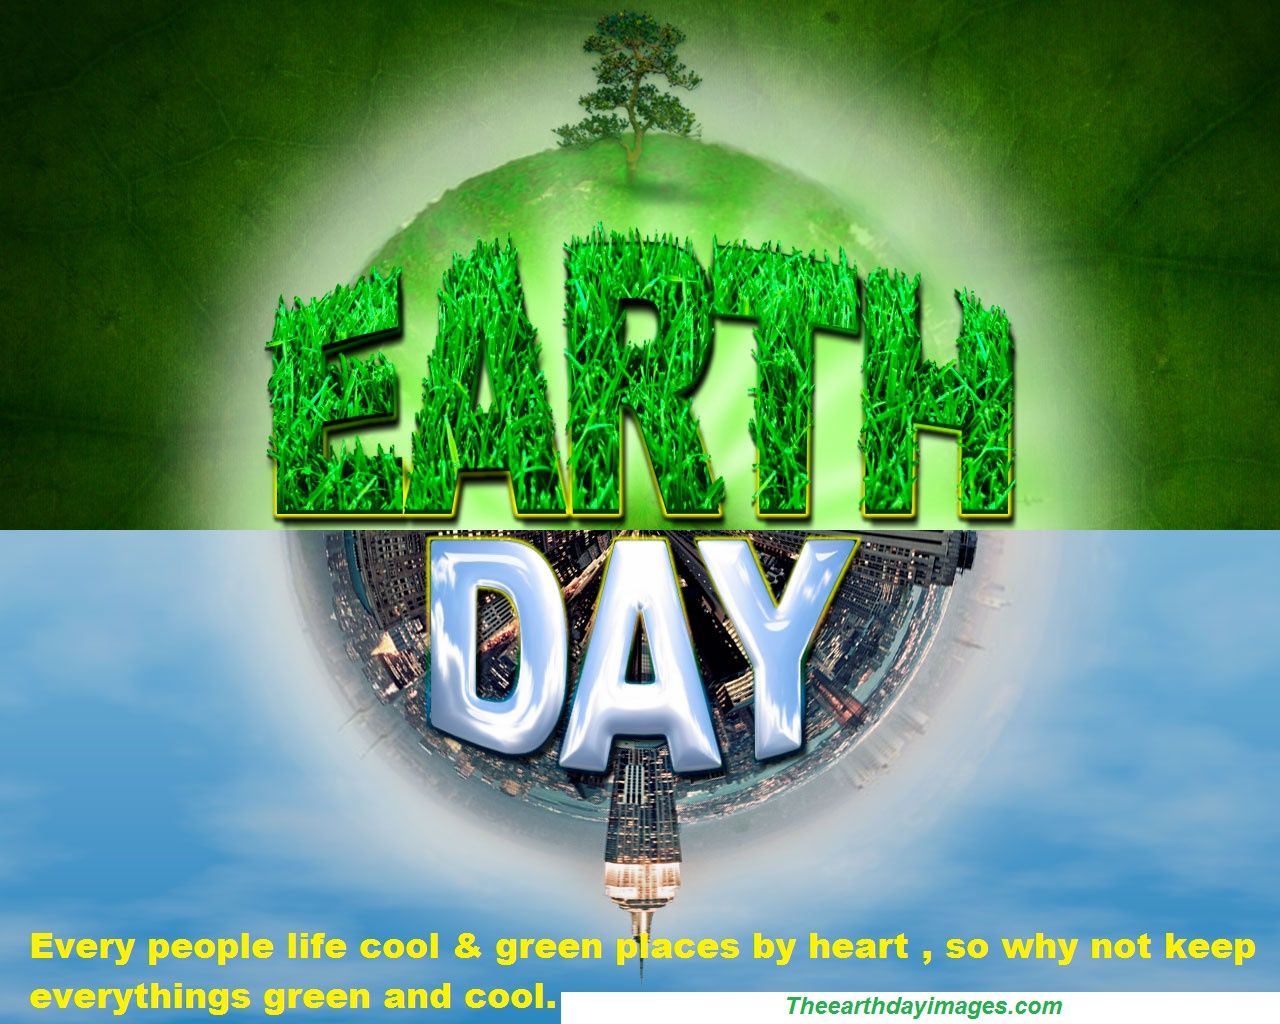 Earth Day 2019 Motivational Quotes, Saying, Thoughts